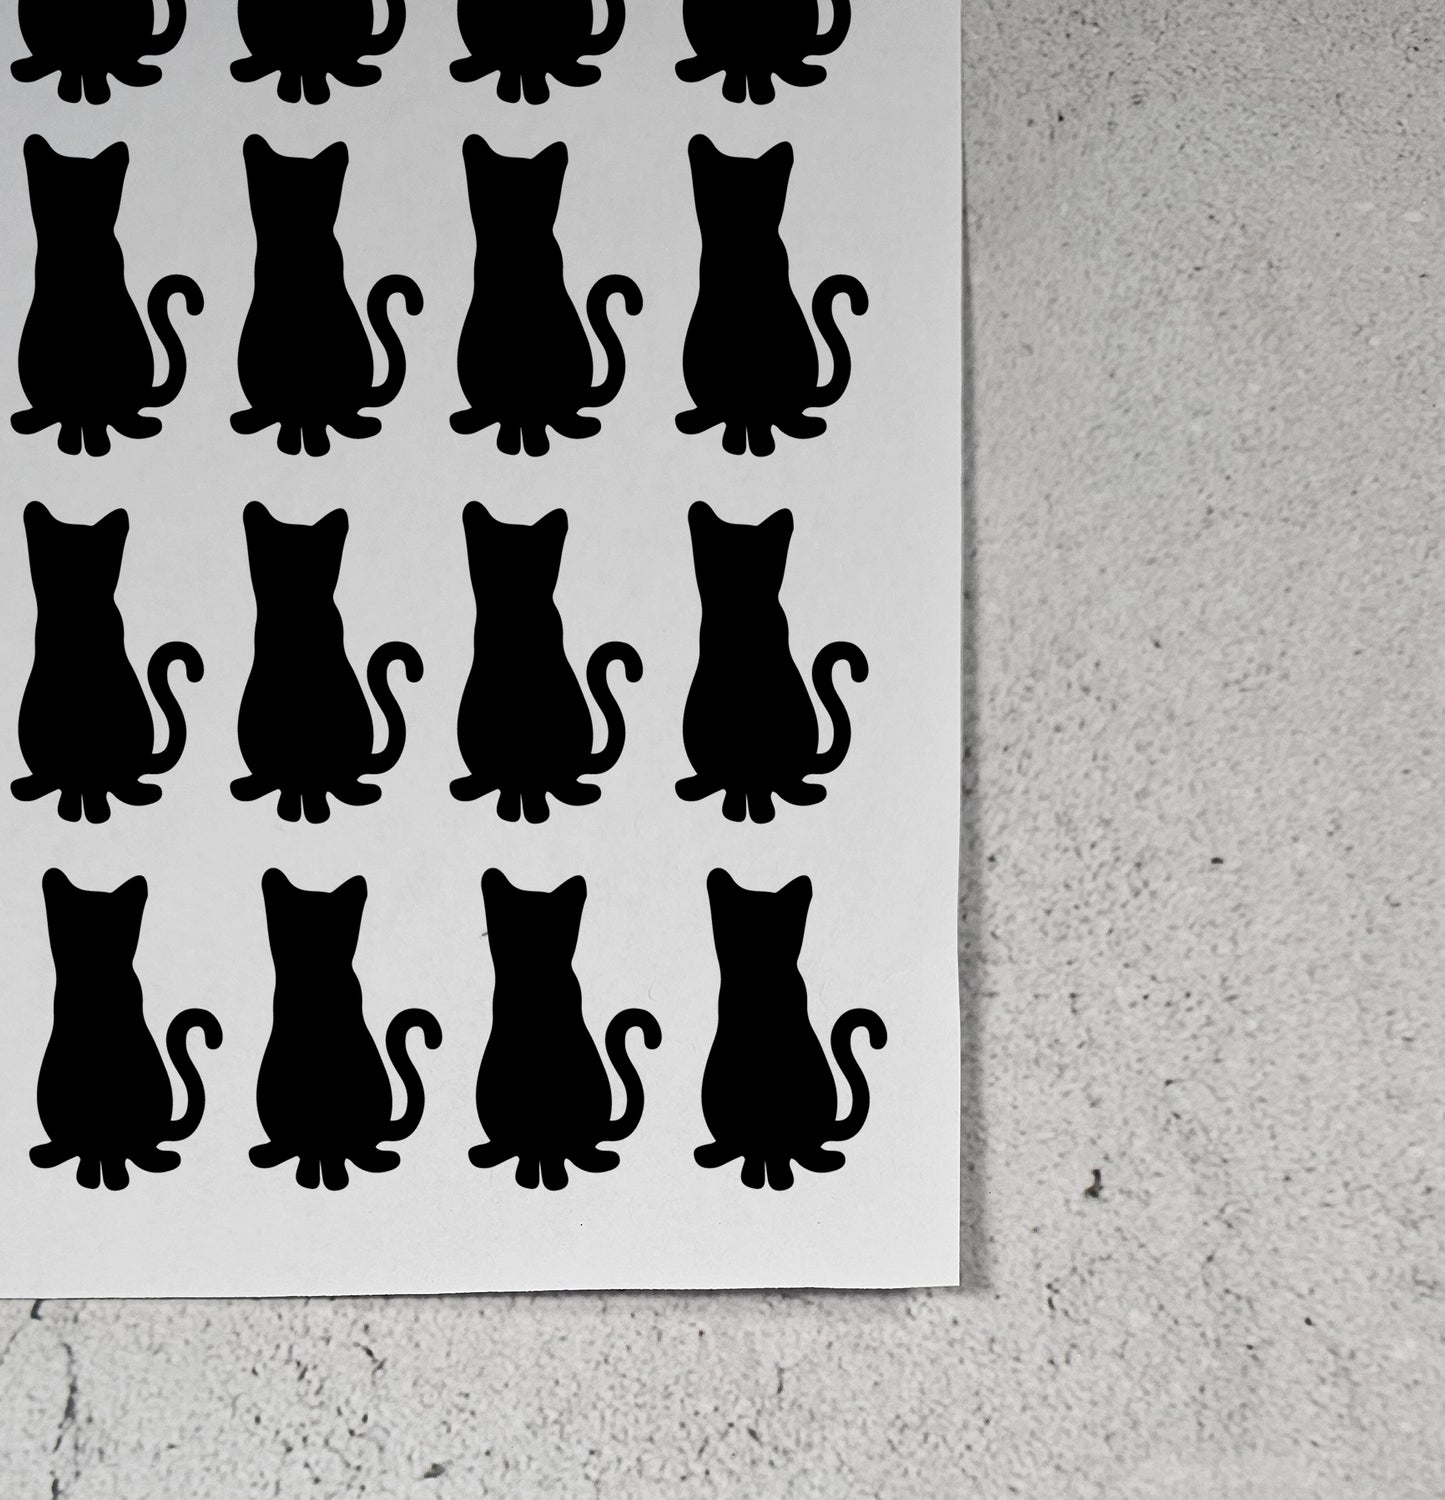 Cats 3 Resist Stickers